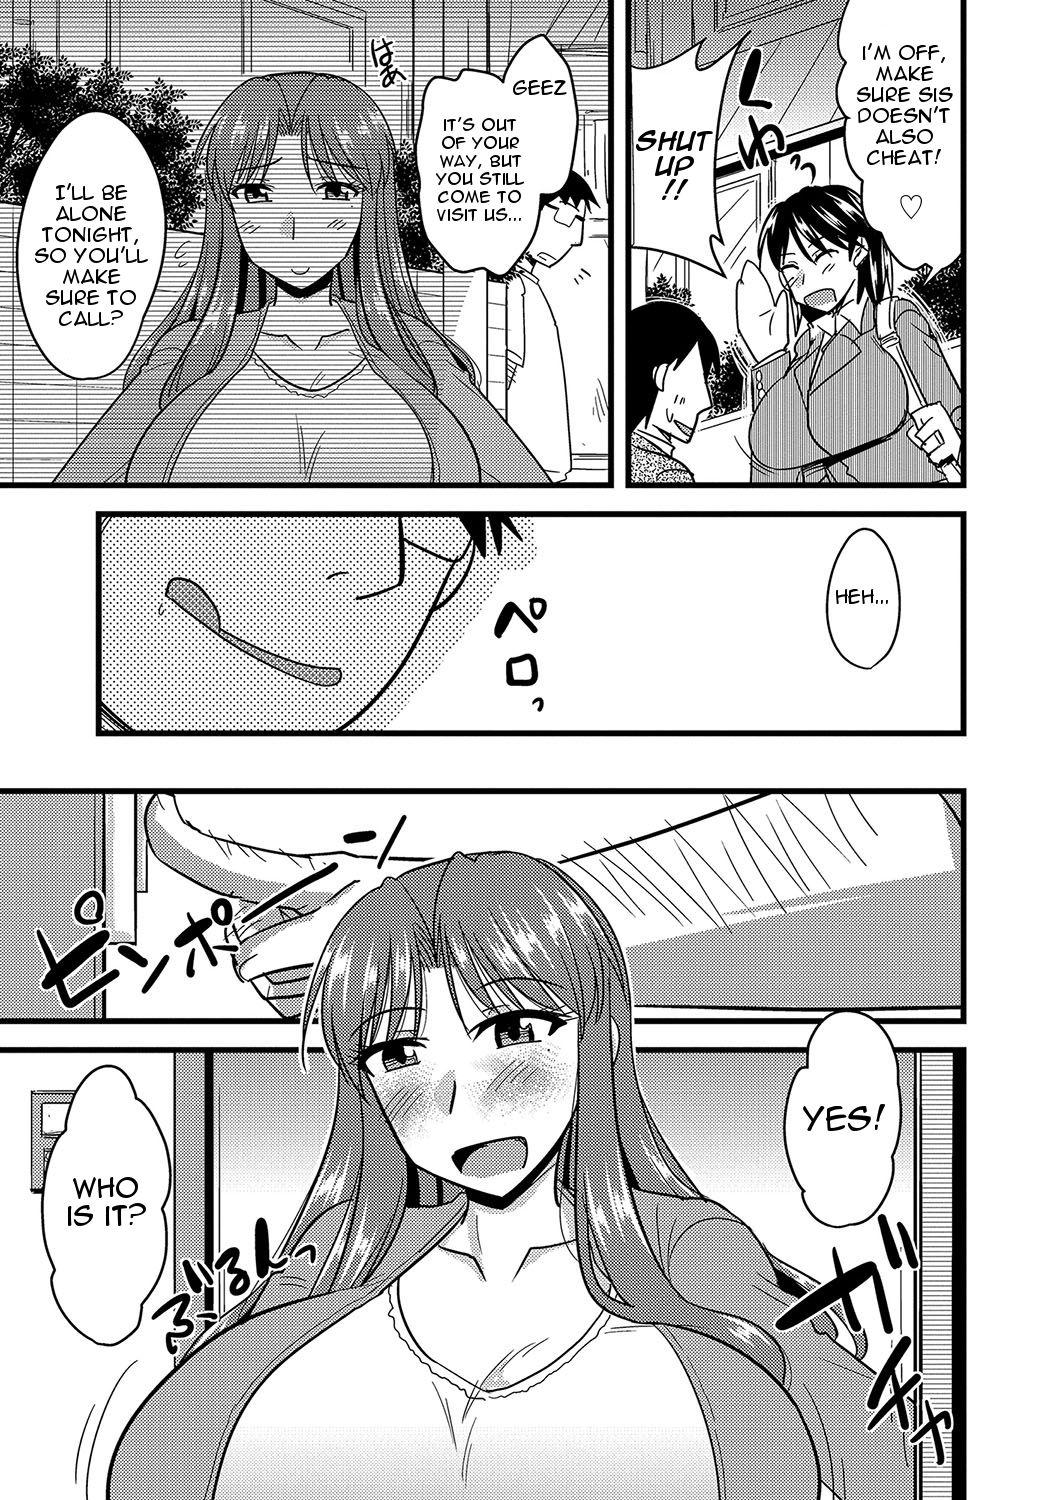 Super Tanin no Tsuma no Netorikata | How to Steal Another Man's Wife Ch. 1-3 Tgirl - Page 6